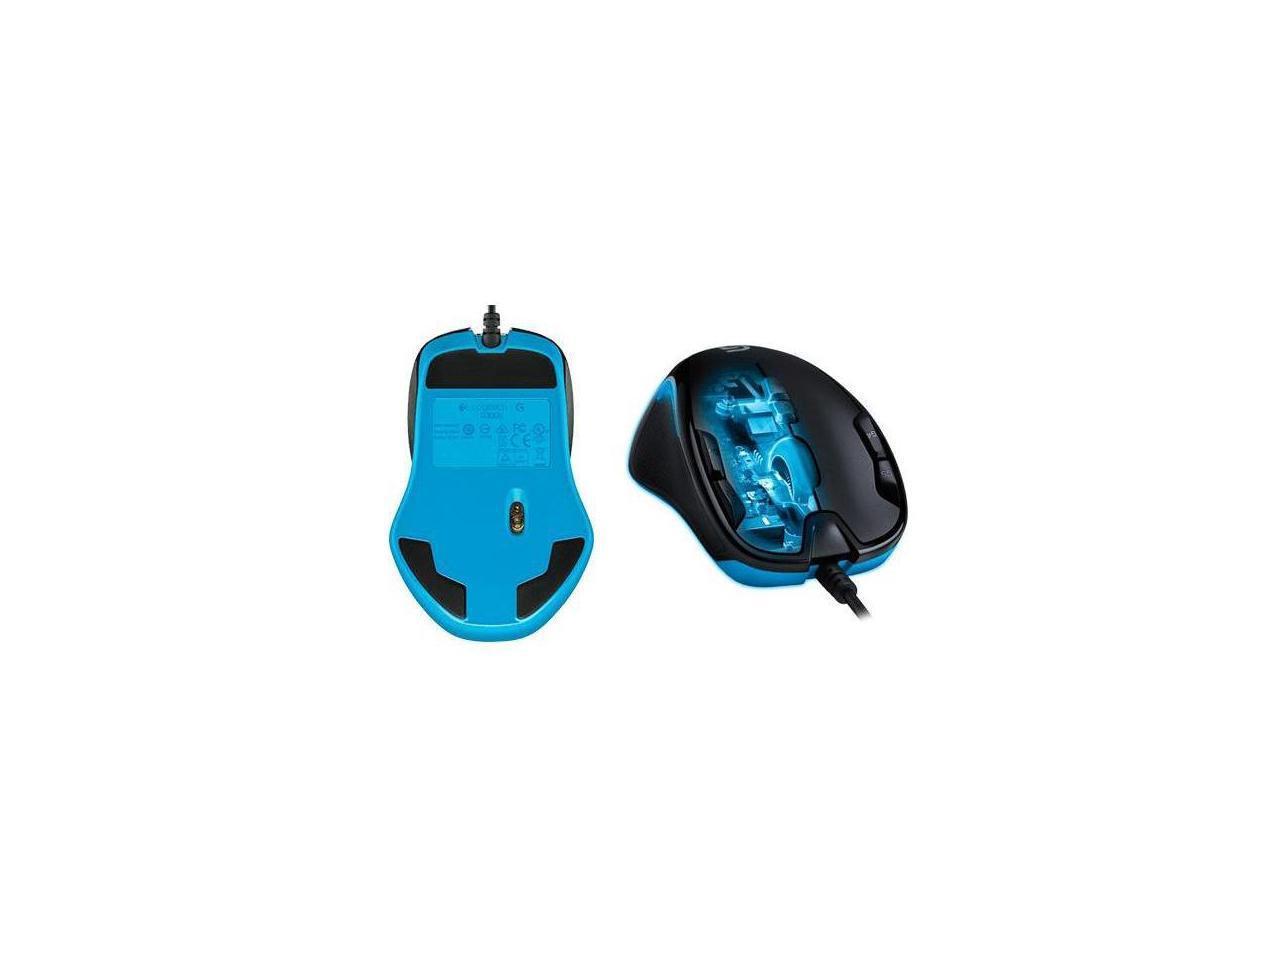 Logitech G300s 9 Programmable USB Gaming Mouse for PC Mac Wired 2500